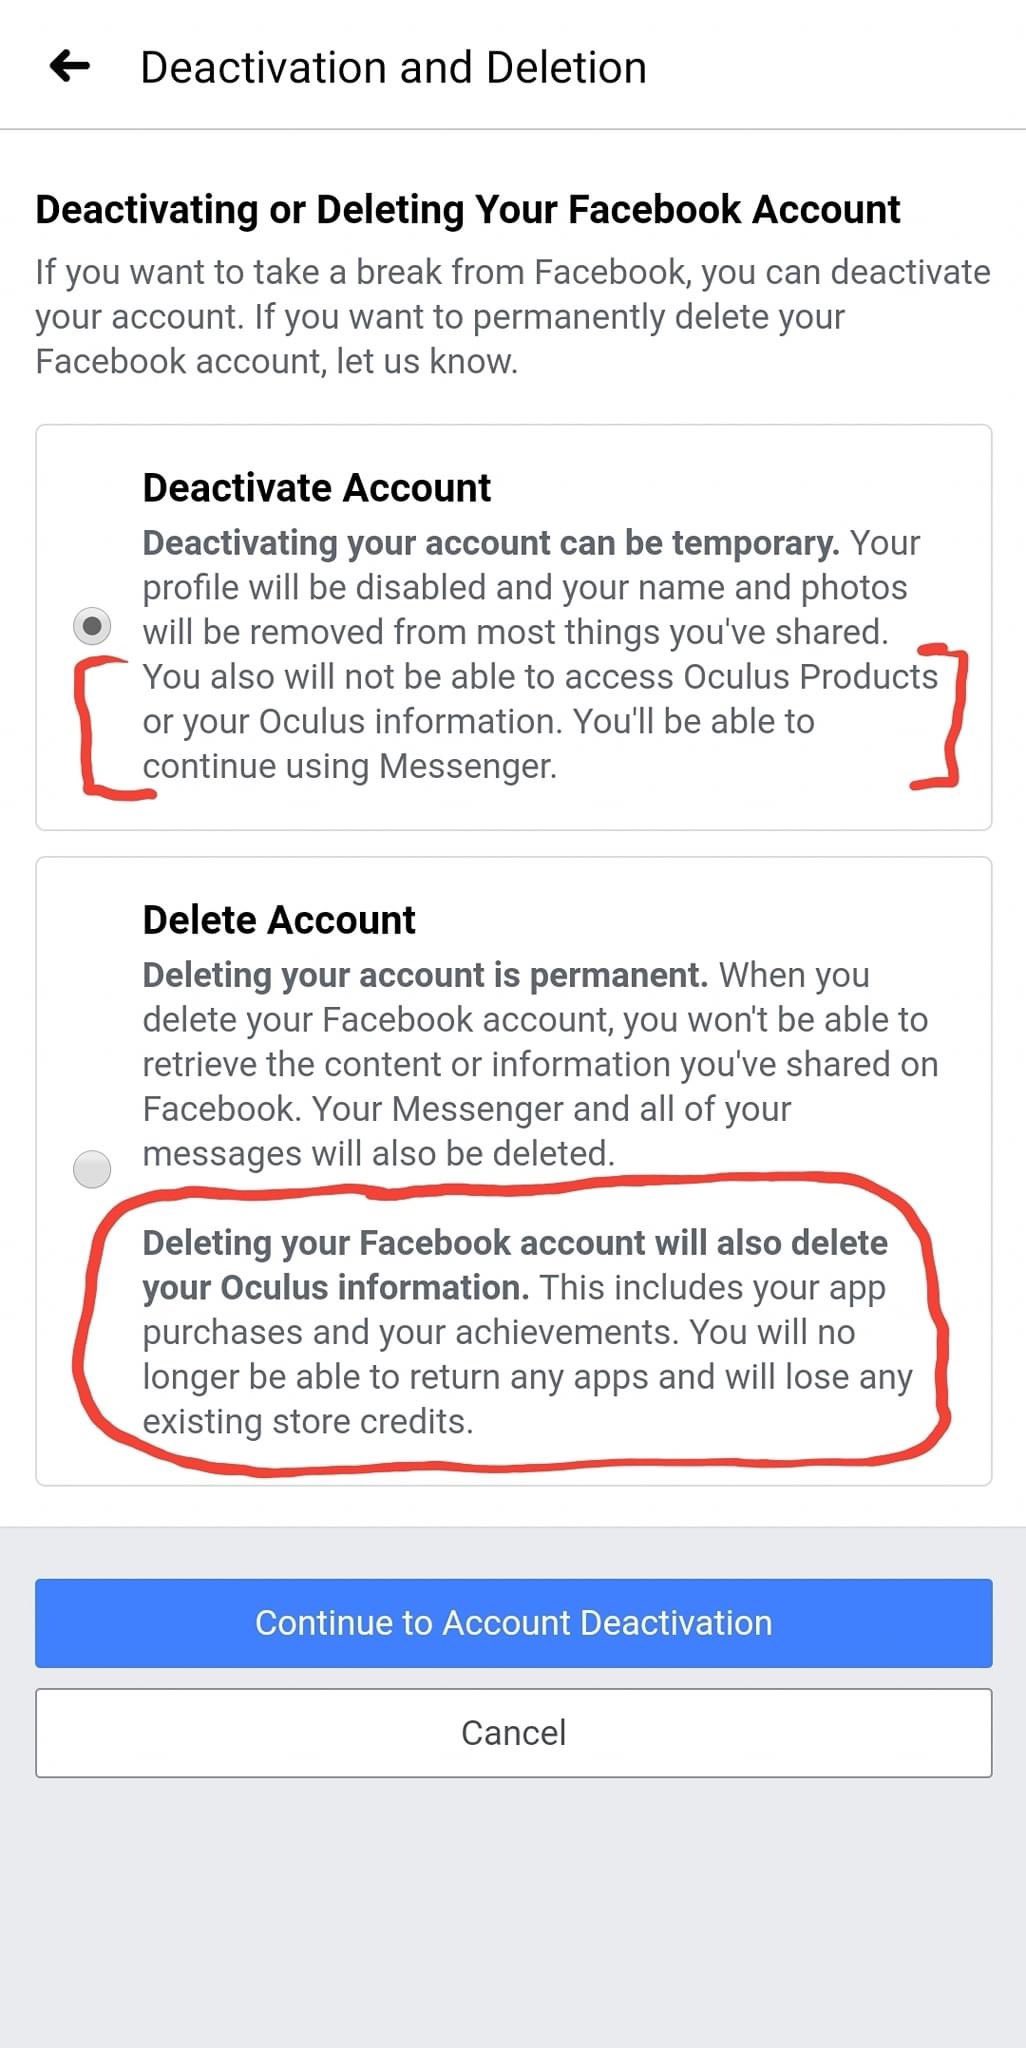 Senatet forarbejdning legation CIX on Twitter: "Important VR PSA: 👉 Deactivating your Facebook profile  disables your Oculus Profile. 👉 Deleting your Facebook account takes away  all your games, purchases, and progress. Source: Eli Schwartz  https://t.co/dSJIcIf0ki" /